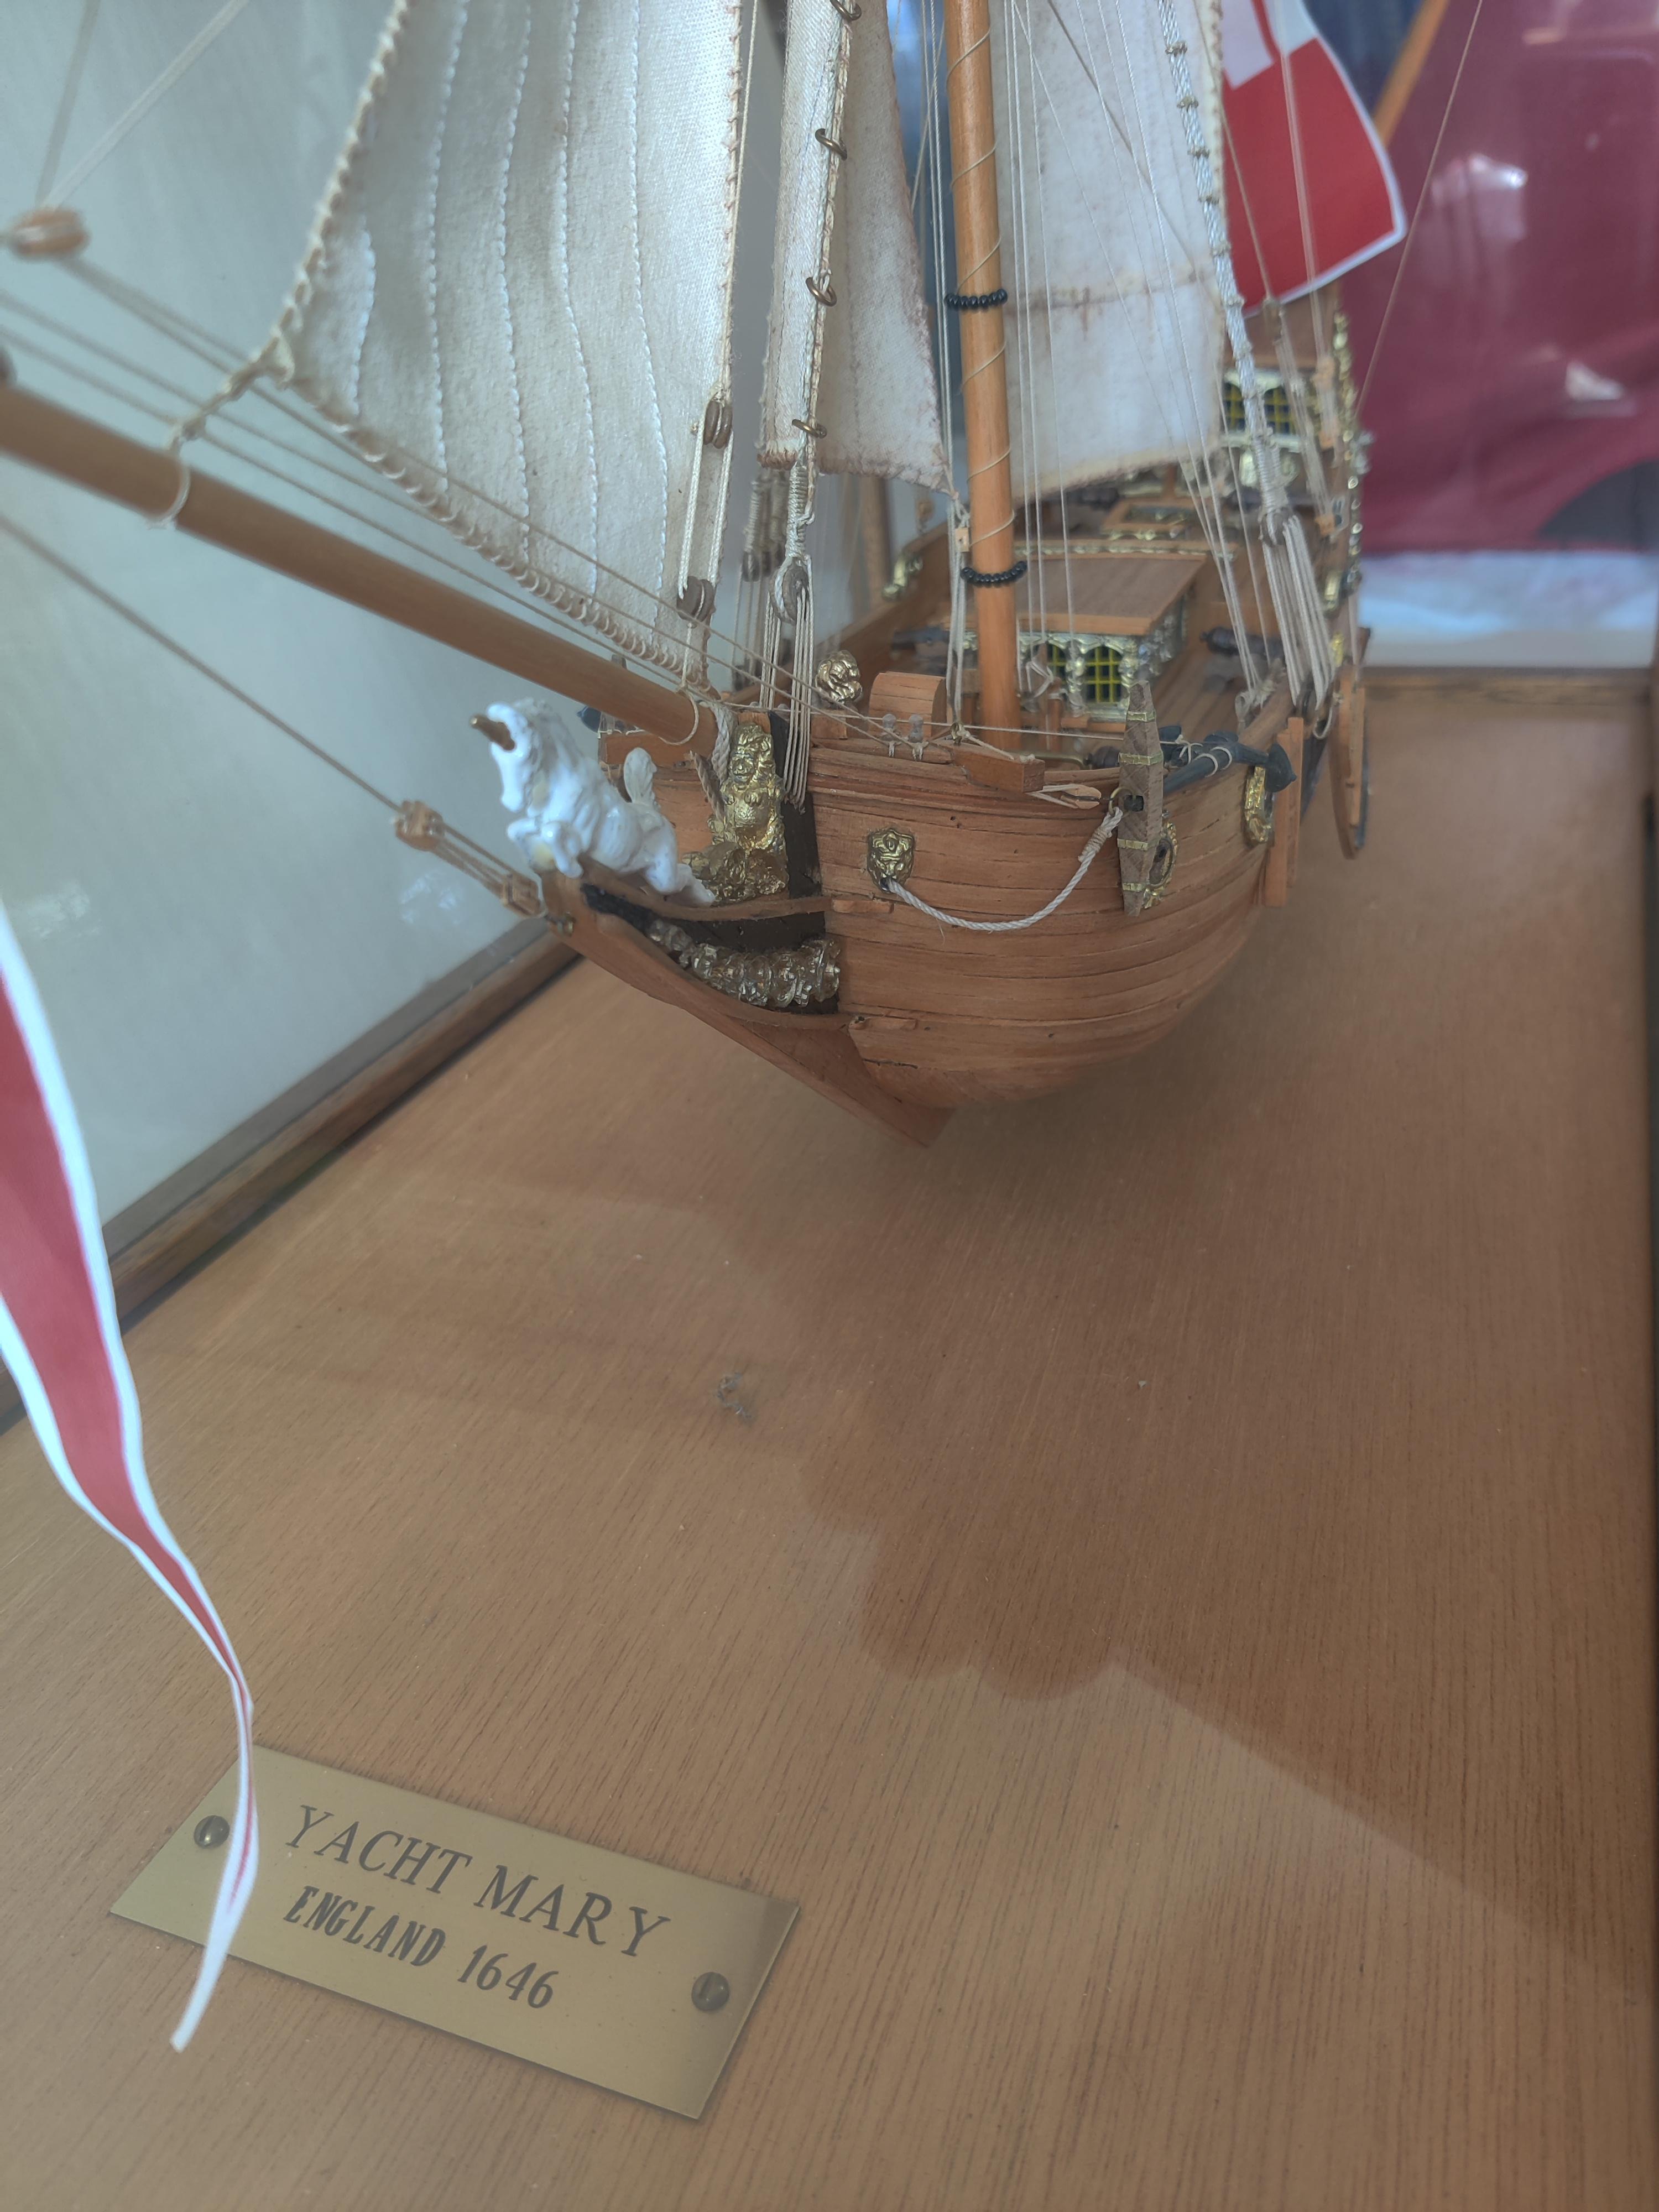 Yacht Mary Model Ship in Glass Oak Display Case
Ship dimensions 18 L x 3 W x 19.75 H
Vintage Ship Kit.   Ship is in excellent condition.
Case has slight wear. 
Brass stamp plate states 